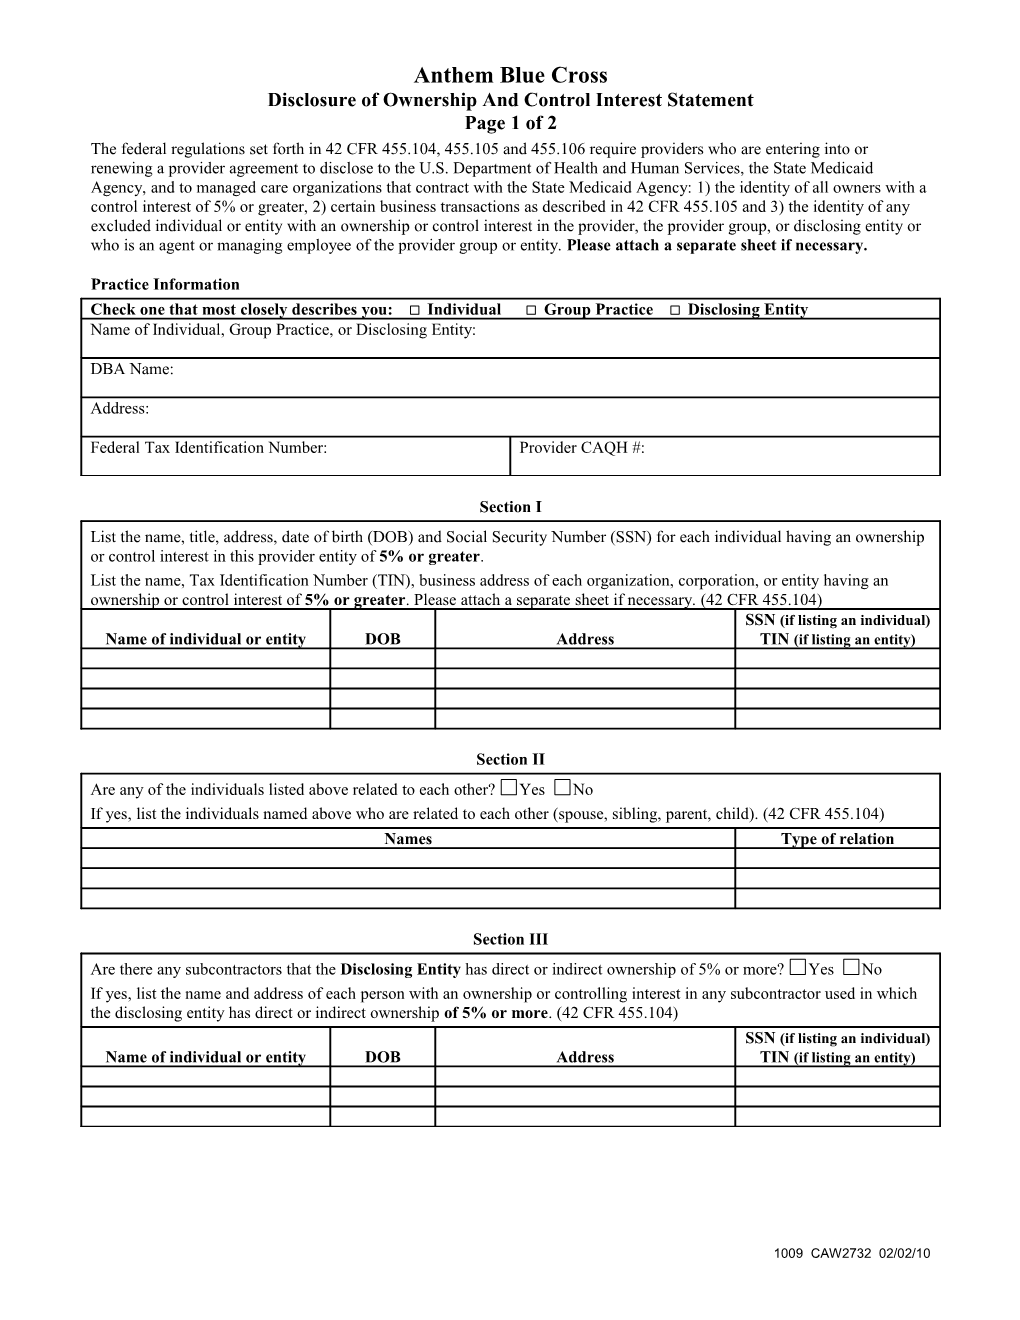 CMS Ownership Disclosure Form